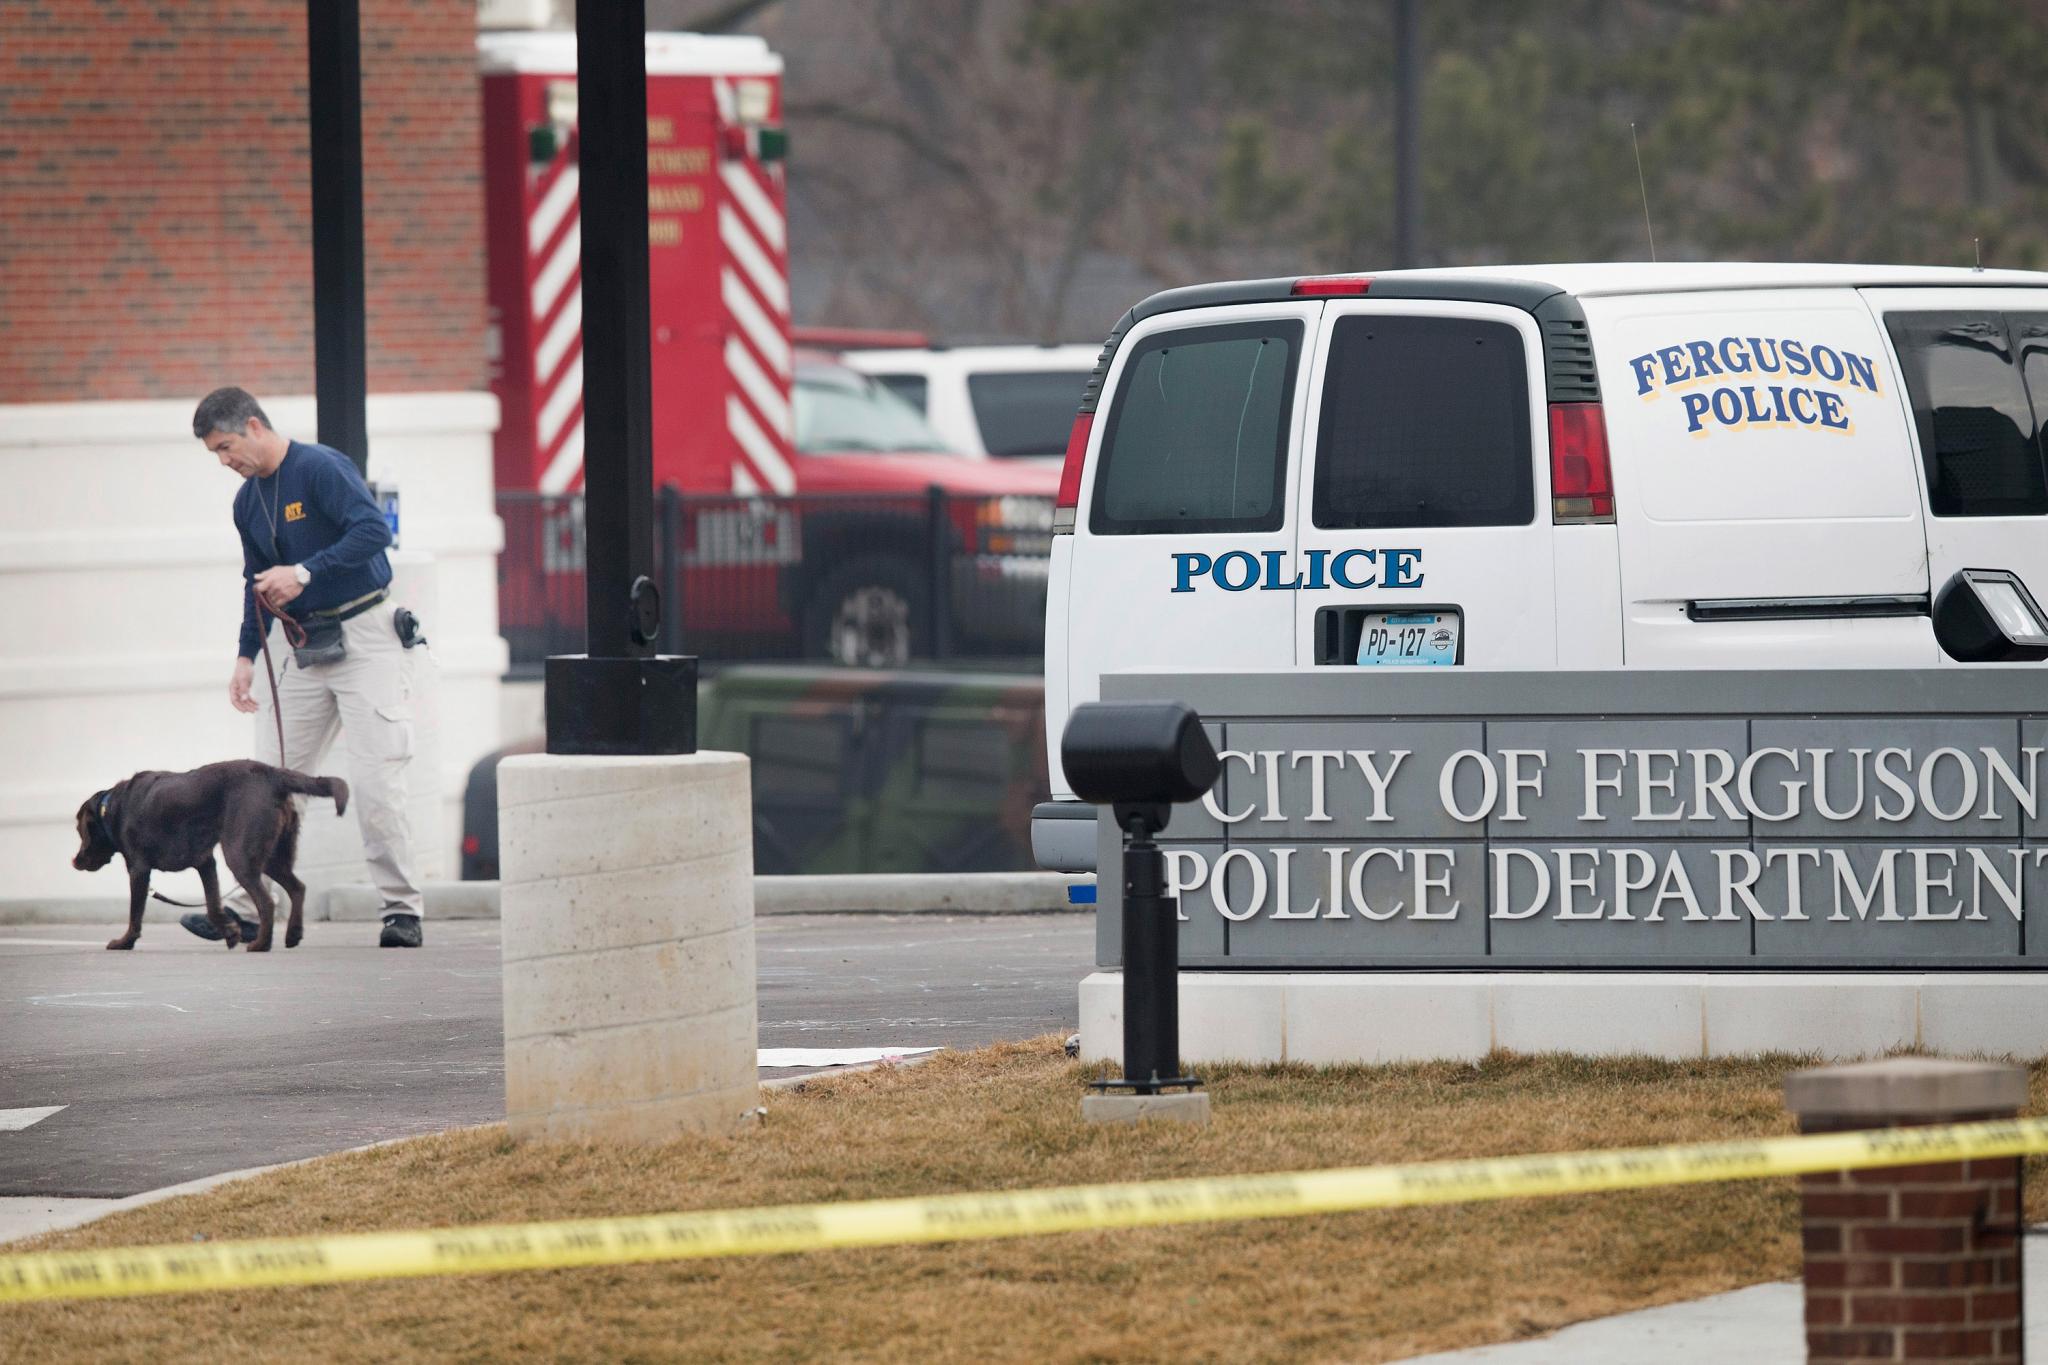 Suspect in Ferguson Police Shooting Says He Wasn’t Aiming for Officers